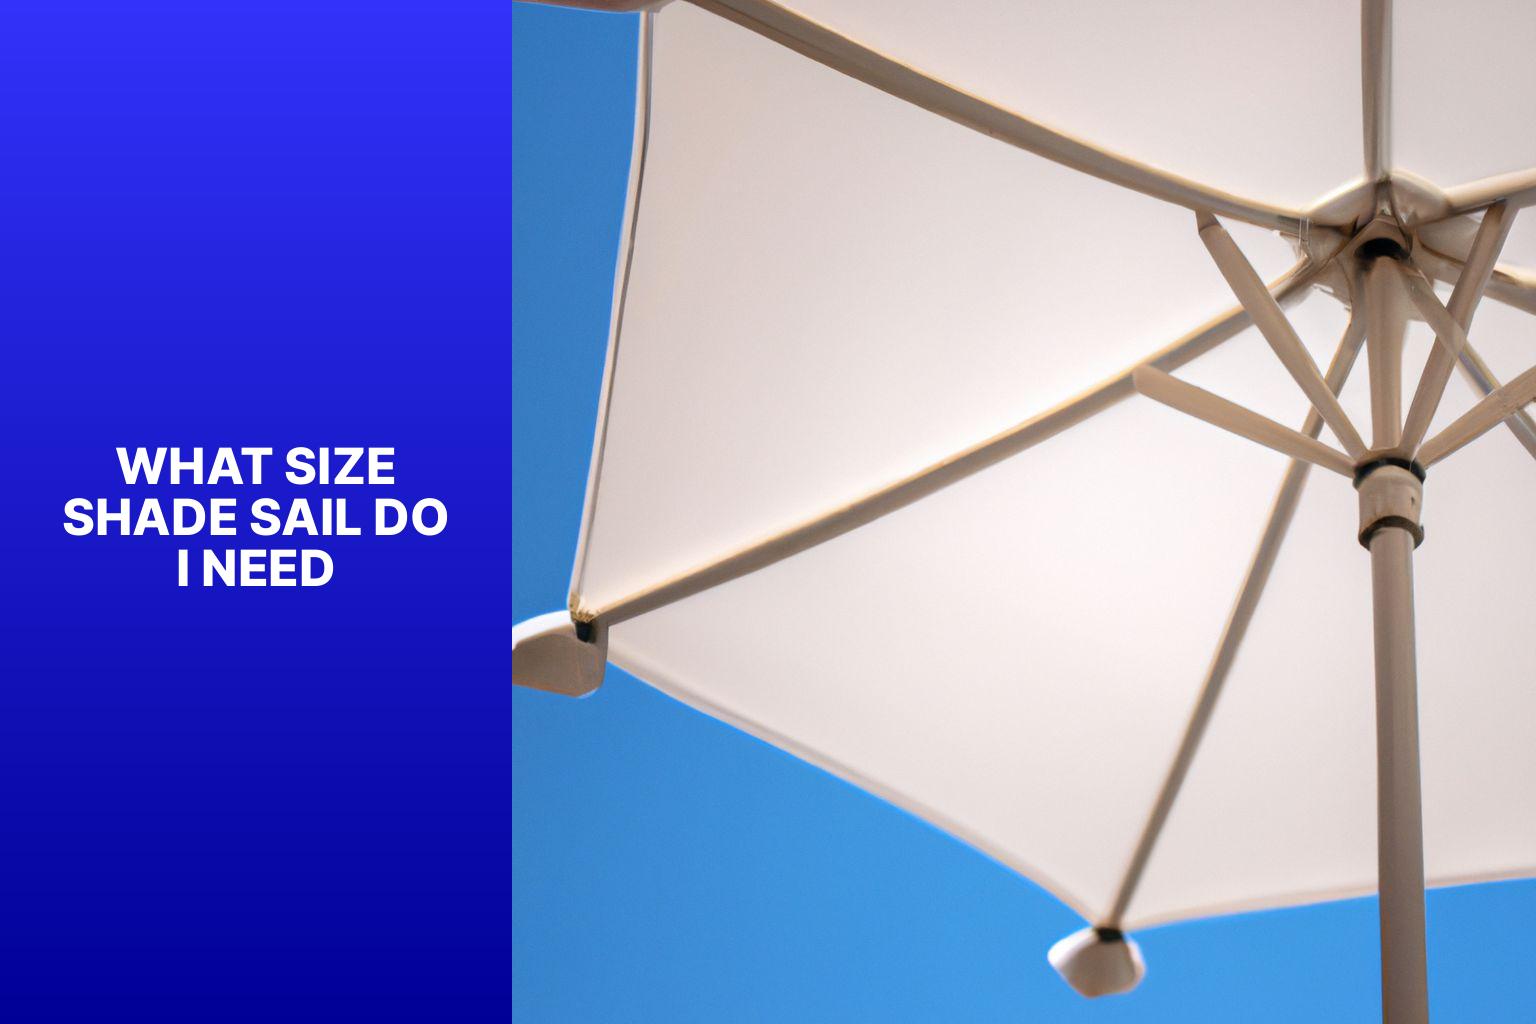 What Size Shade Sail Do I Need? Ultimate Guide to Choosing the Right Size